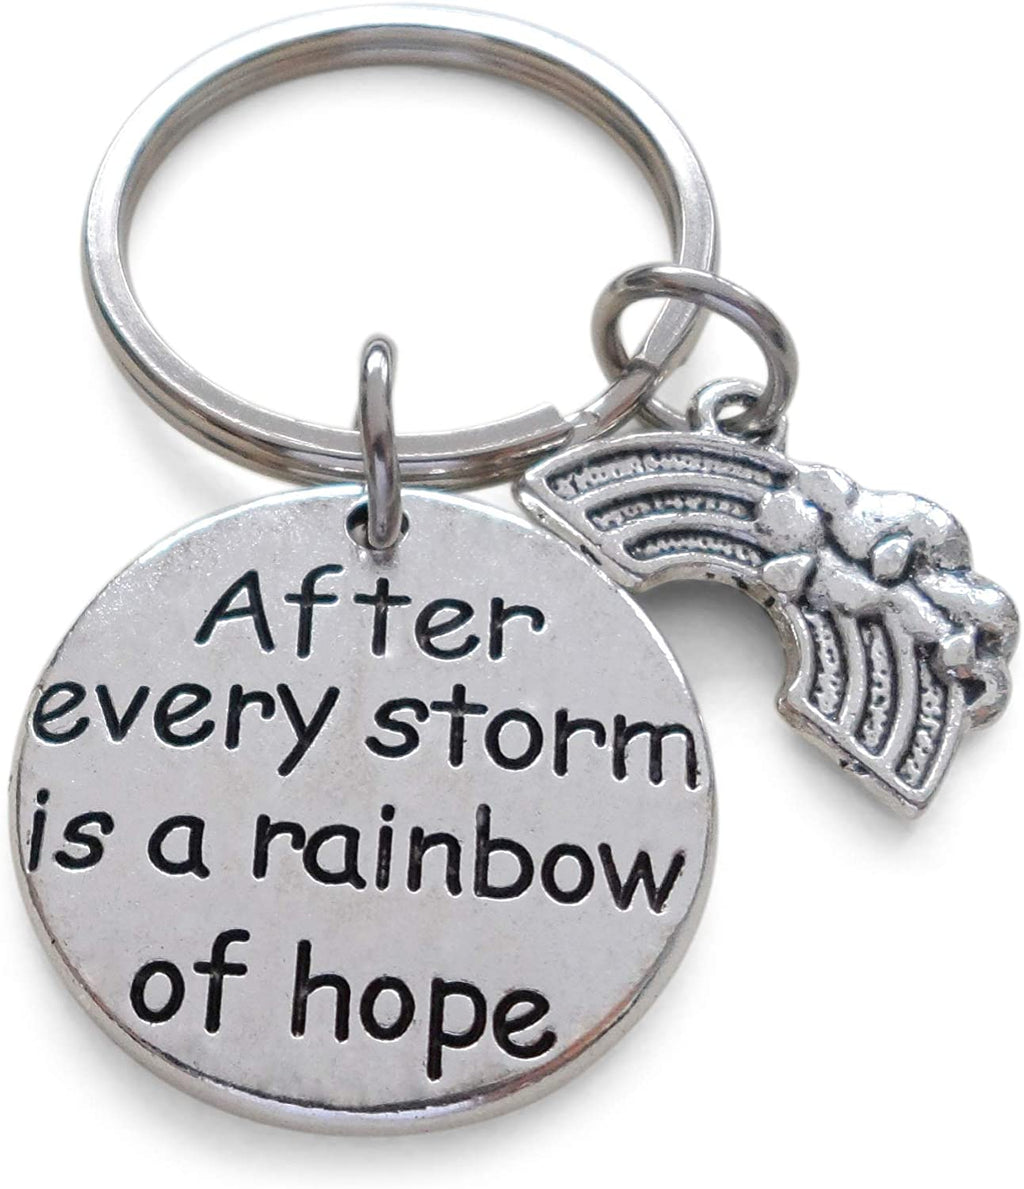 After Every Storm Is a Rainbow of Hope Keychain, Encouragement Keychain by JewelryEveryday